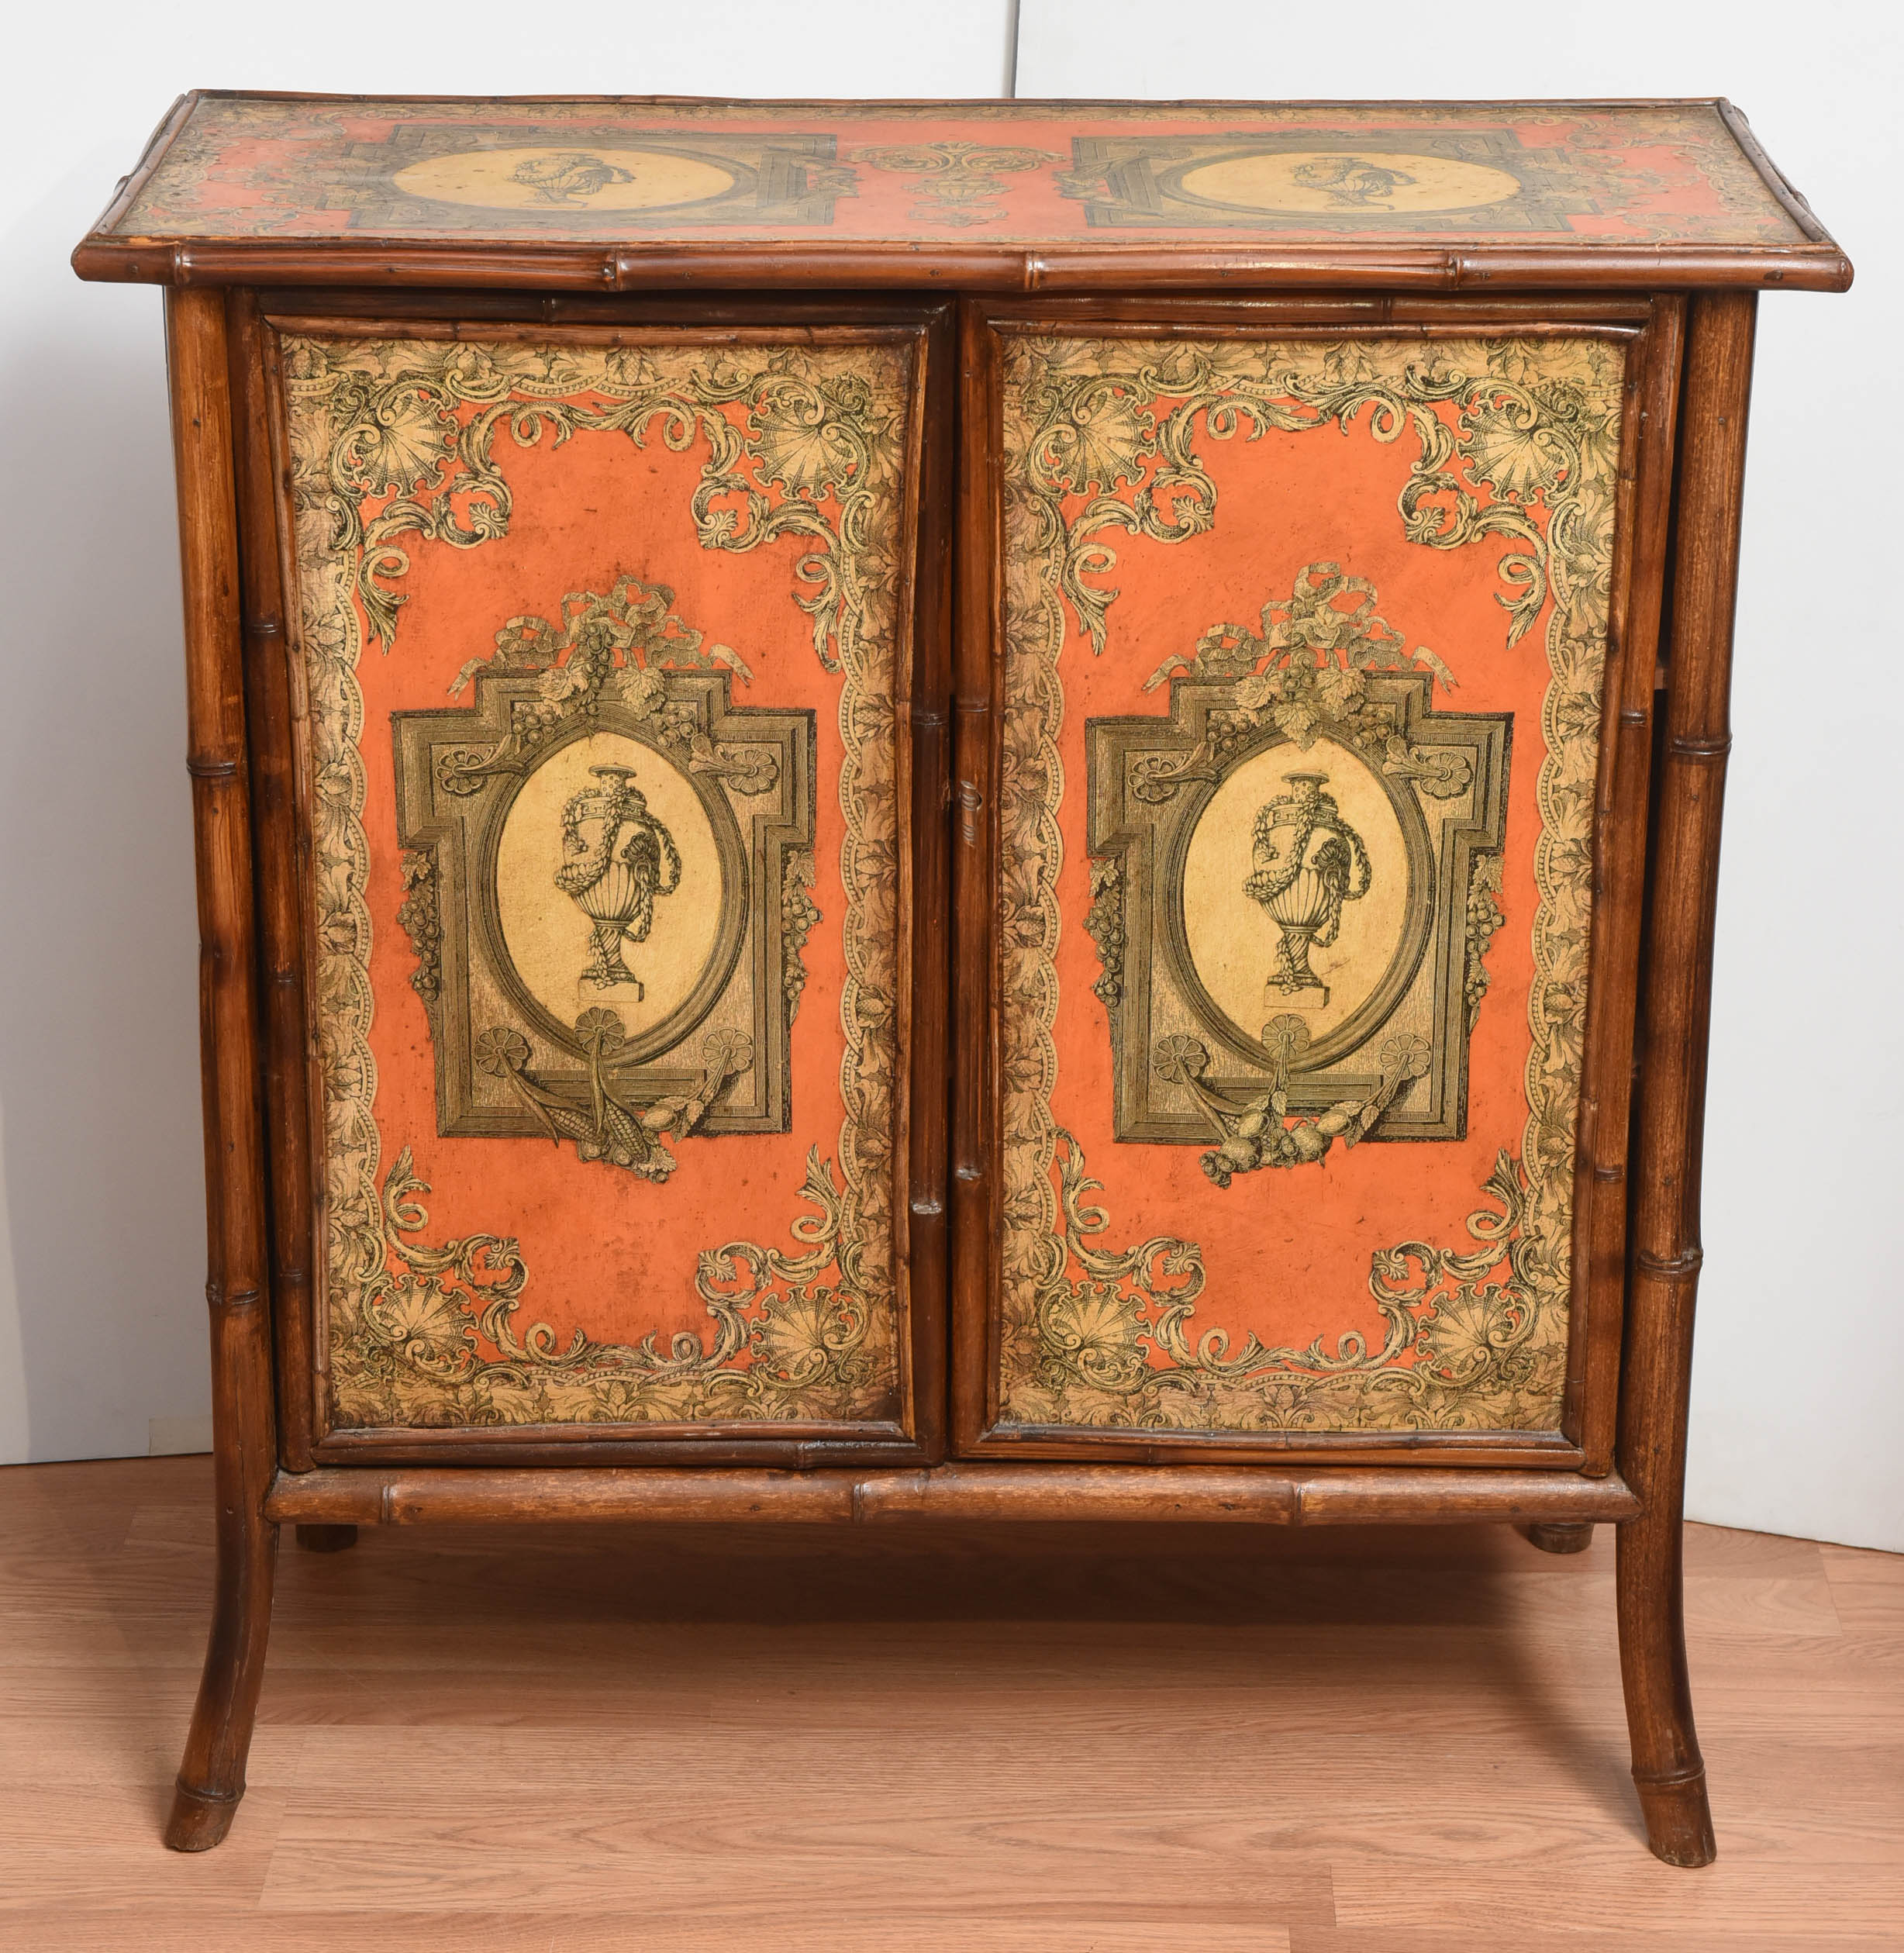 Charming and whimsical antique bamboo cabinet. Fabulous Decoupage décor on a bright coral background.